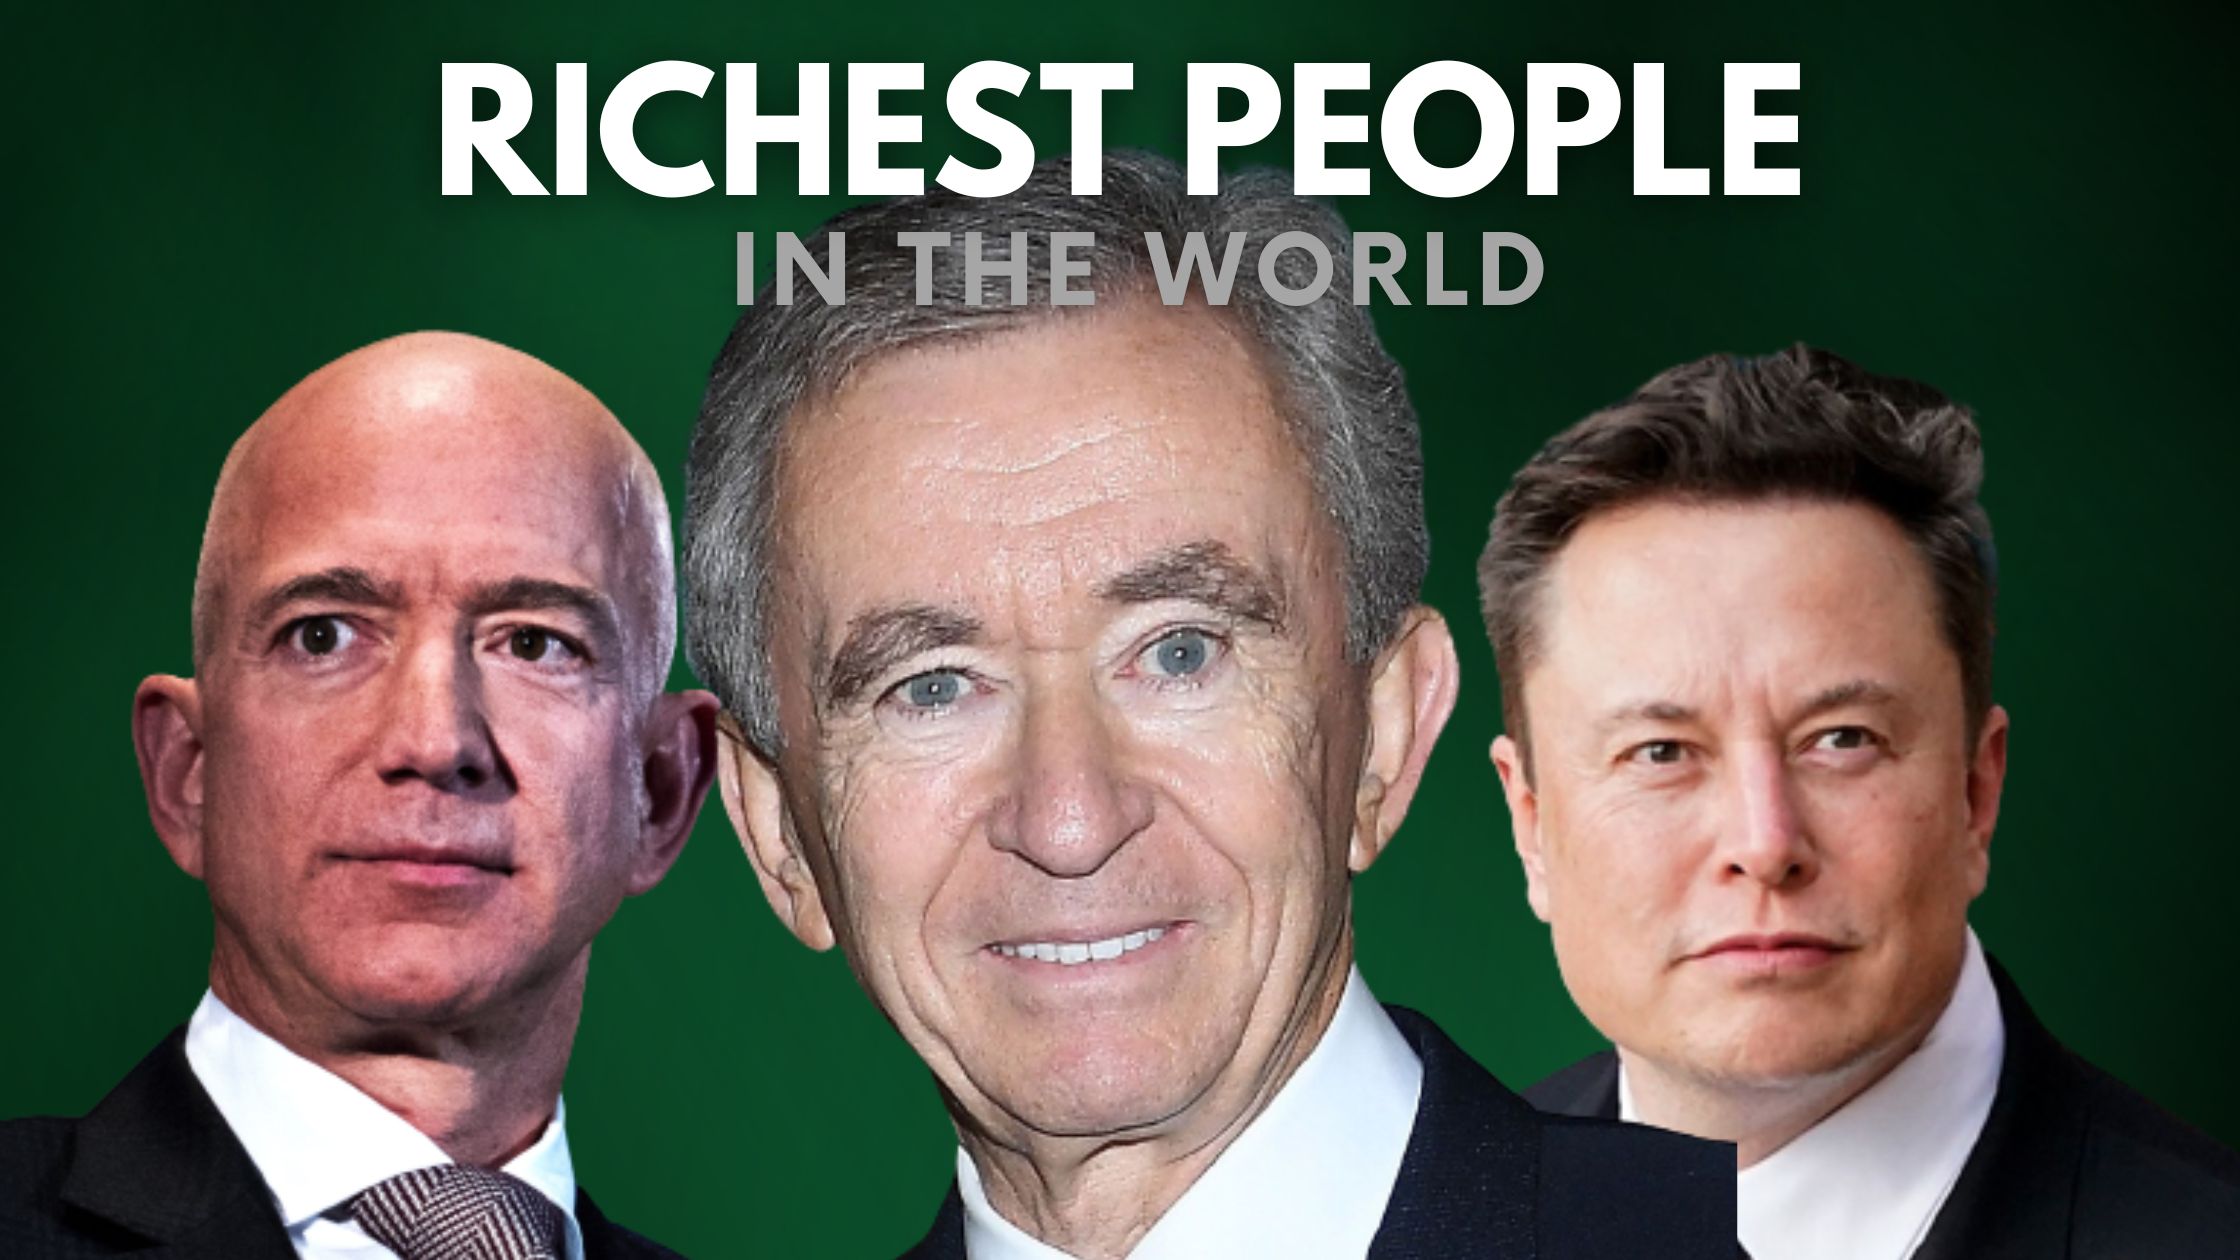 Top 10 Richest People In The World2023 